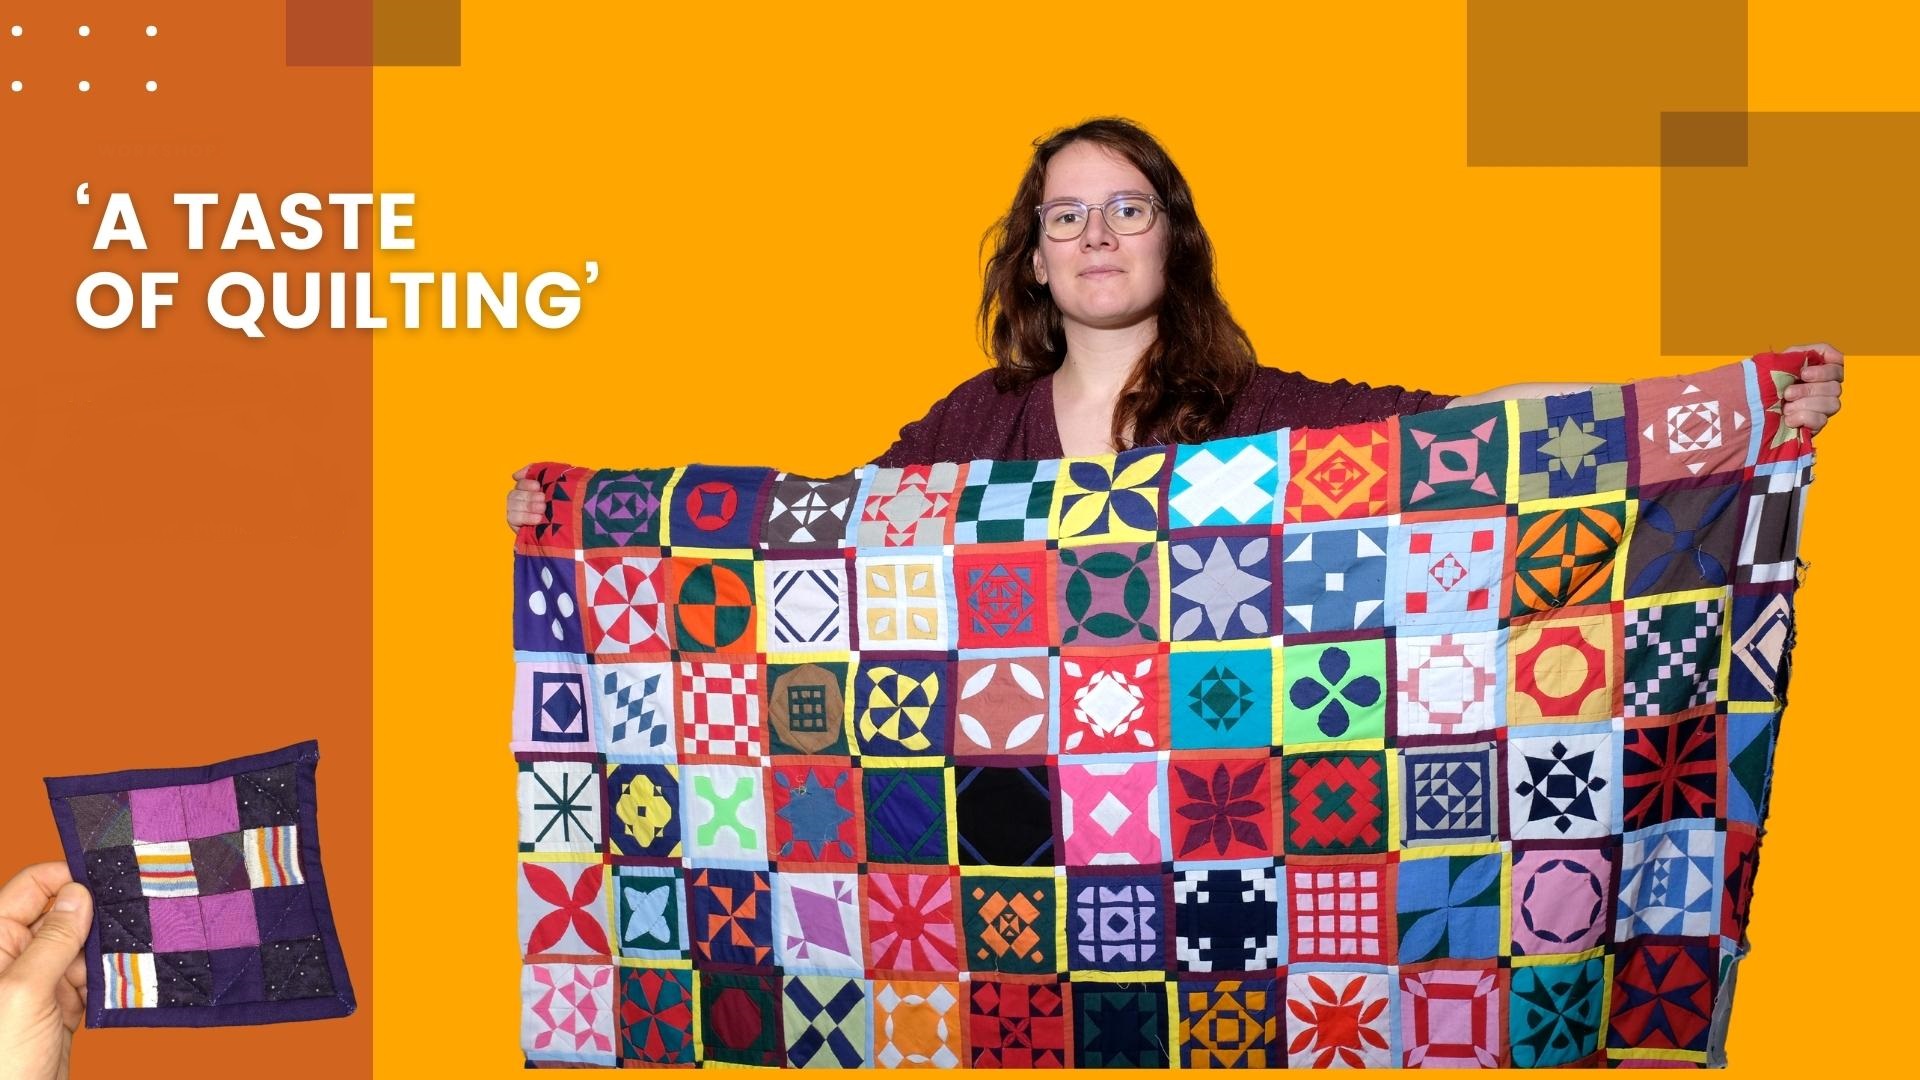 ‘A taste of quilting’ 